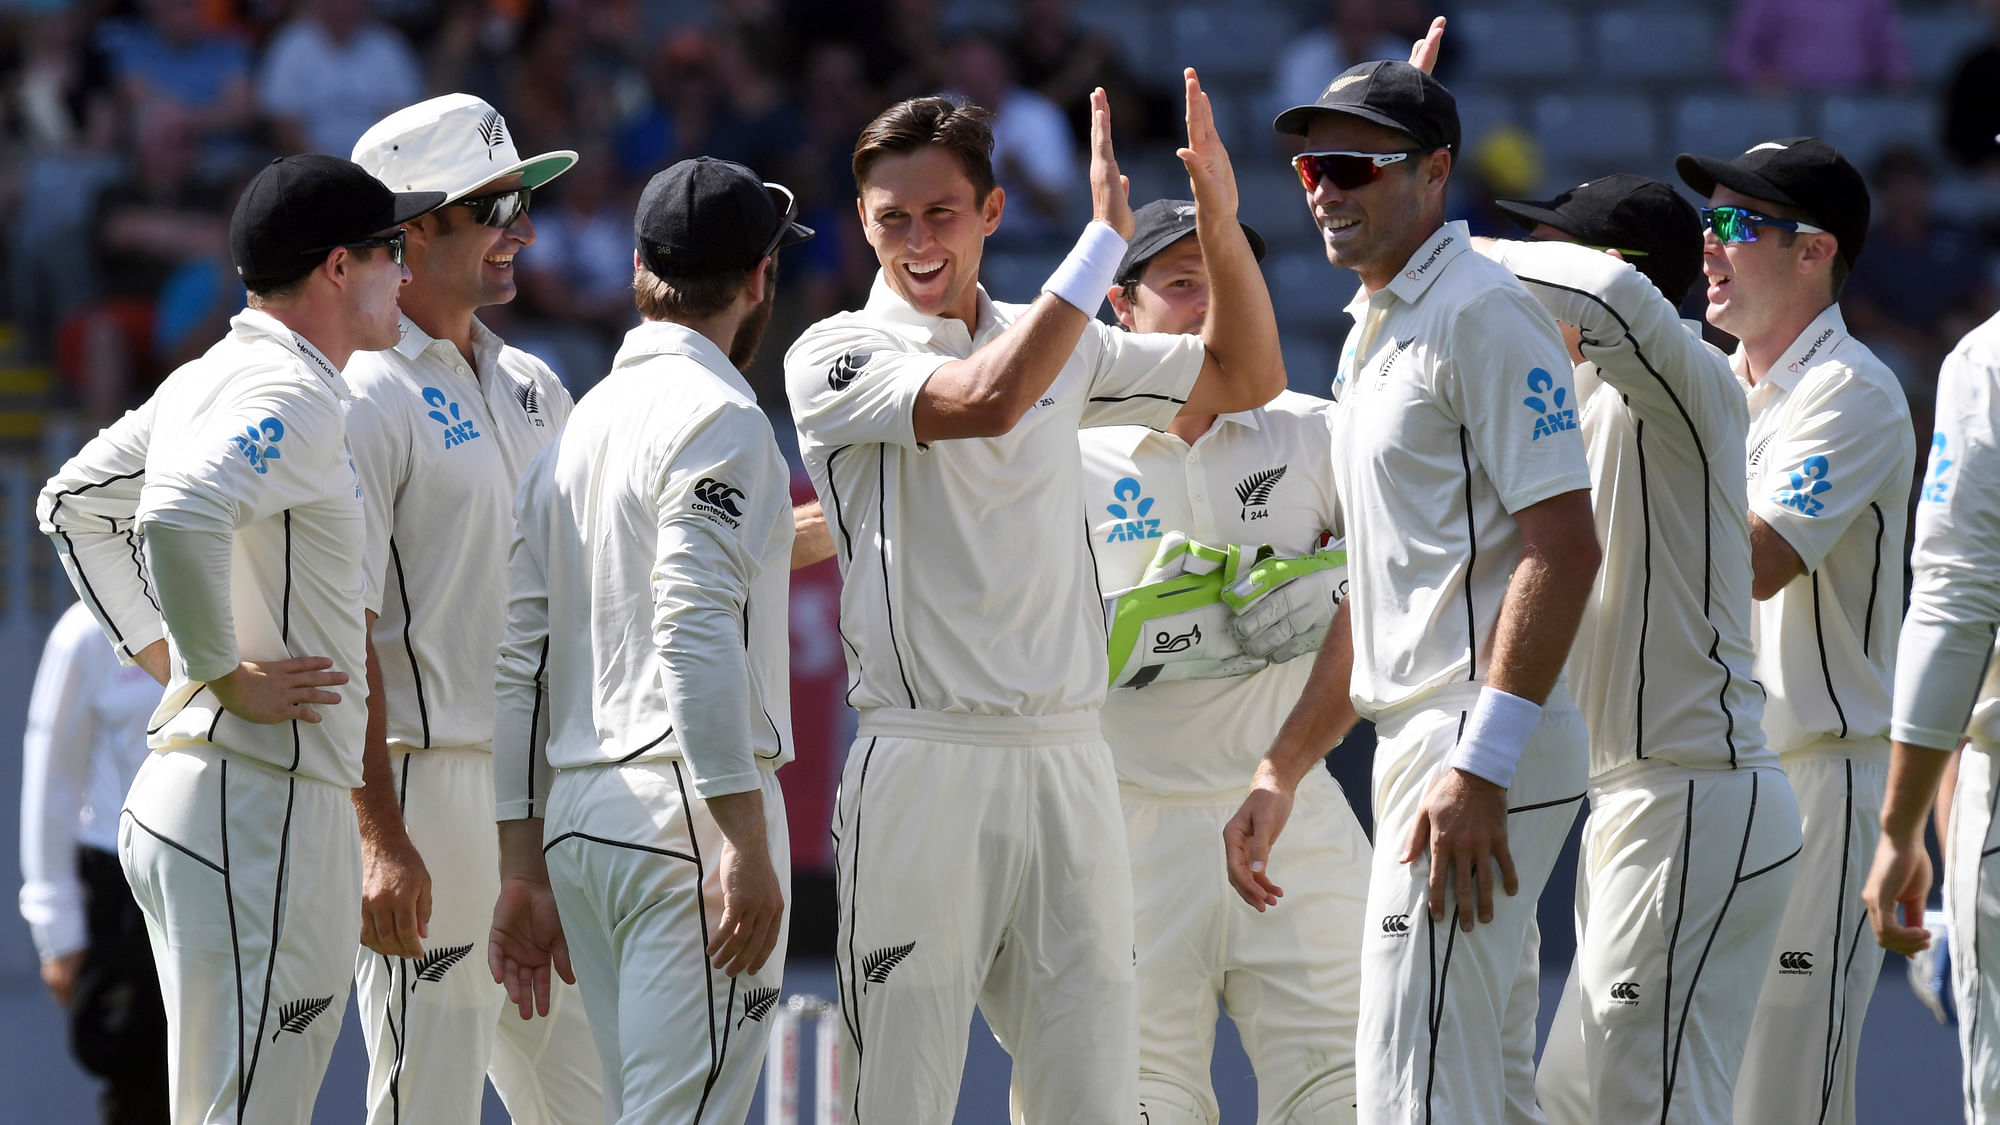 rent Boult is ready to challenge India captain Virat Kohli on his return to international cricket during the two-Test series starting on Friday, 21 February